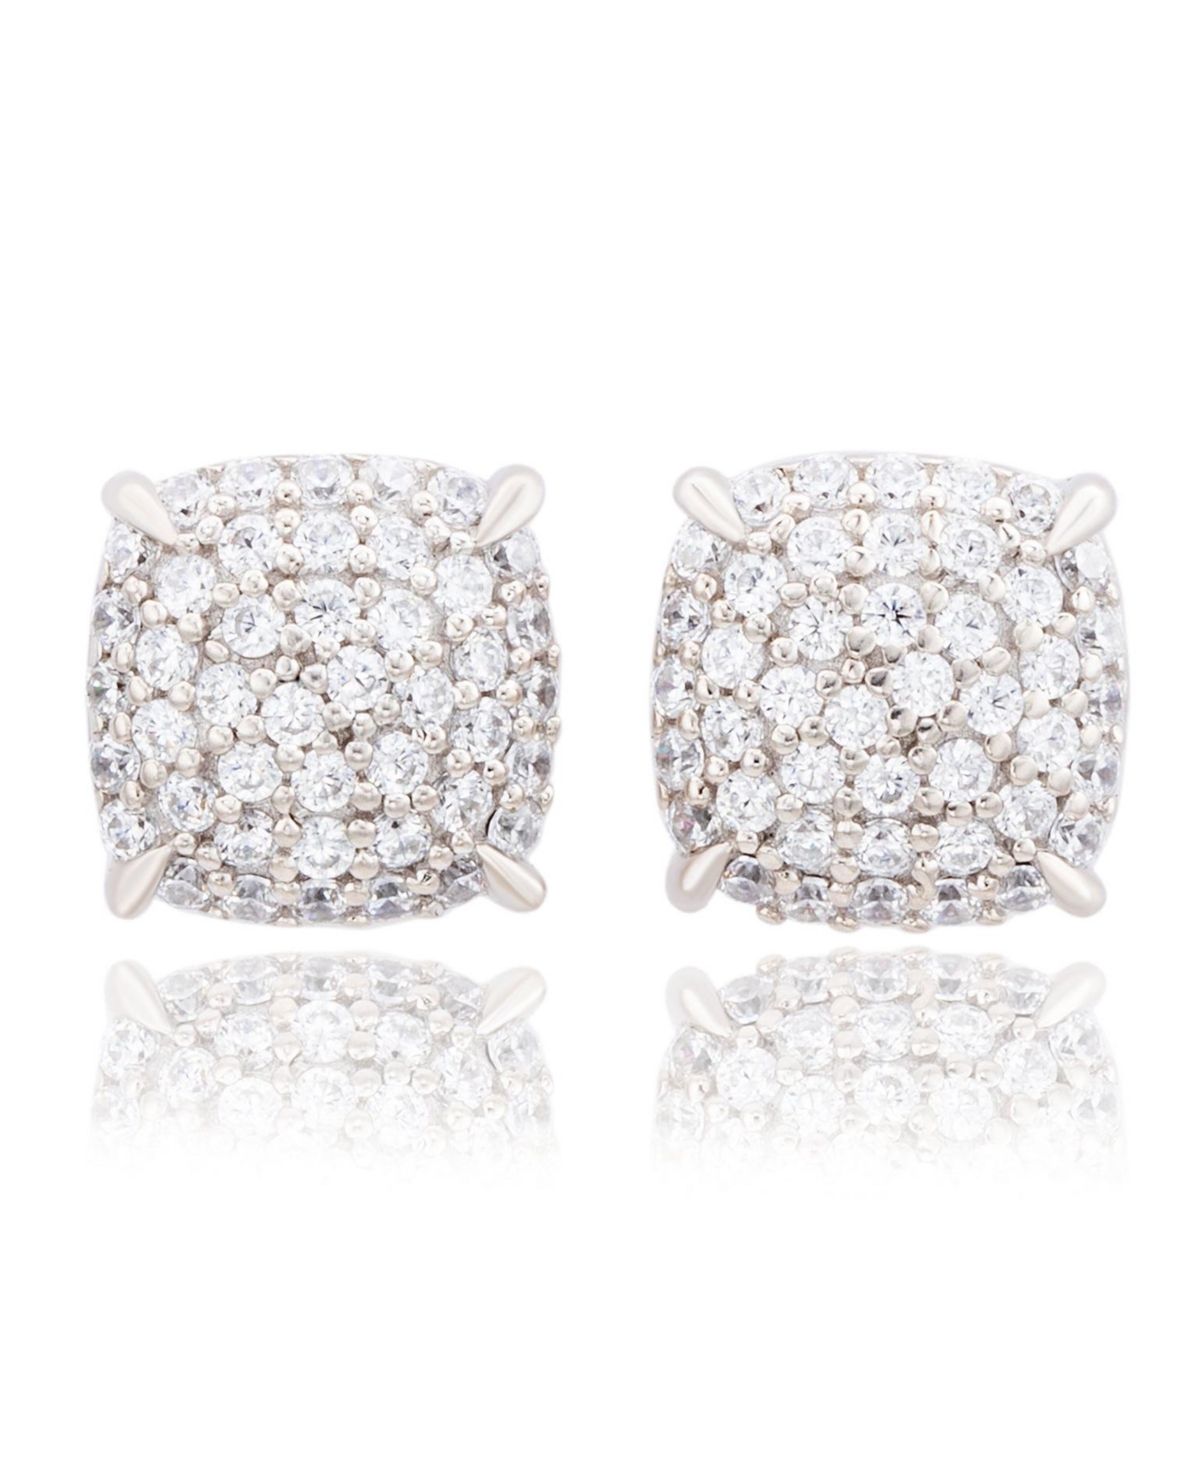 Suzy Levian Sterling Silver Cubic Zirconia Pave Puff Cushion Stud Earrings - White